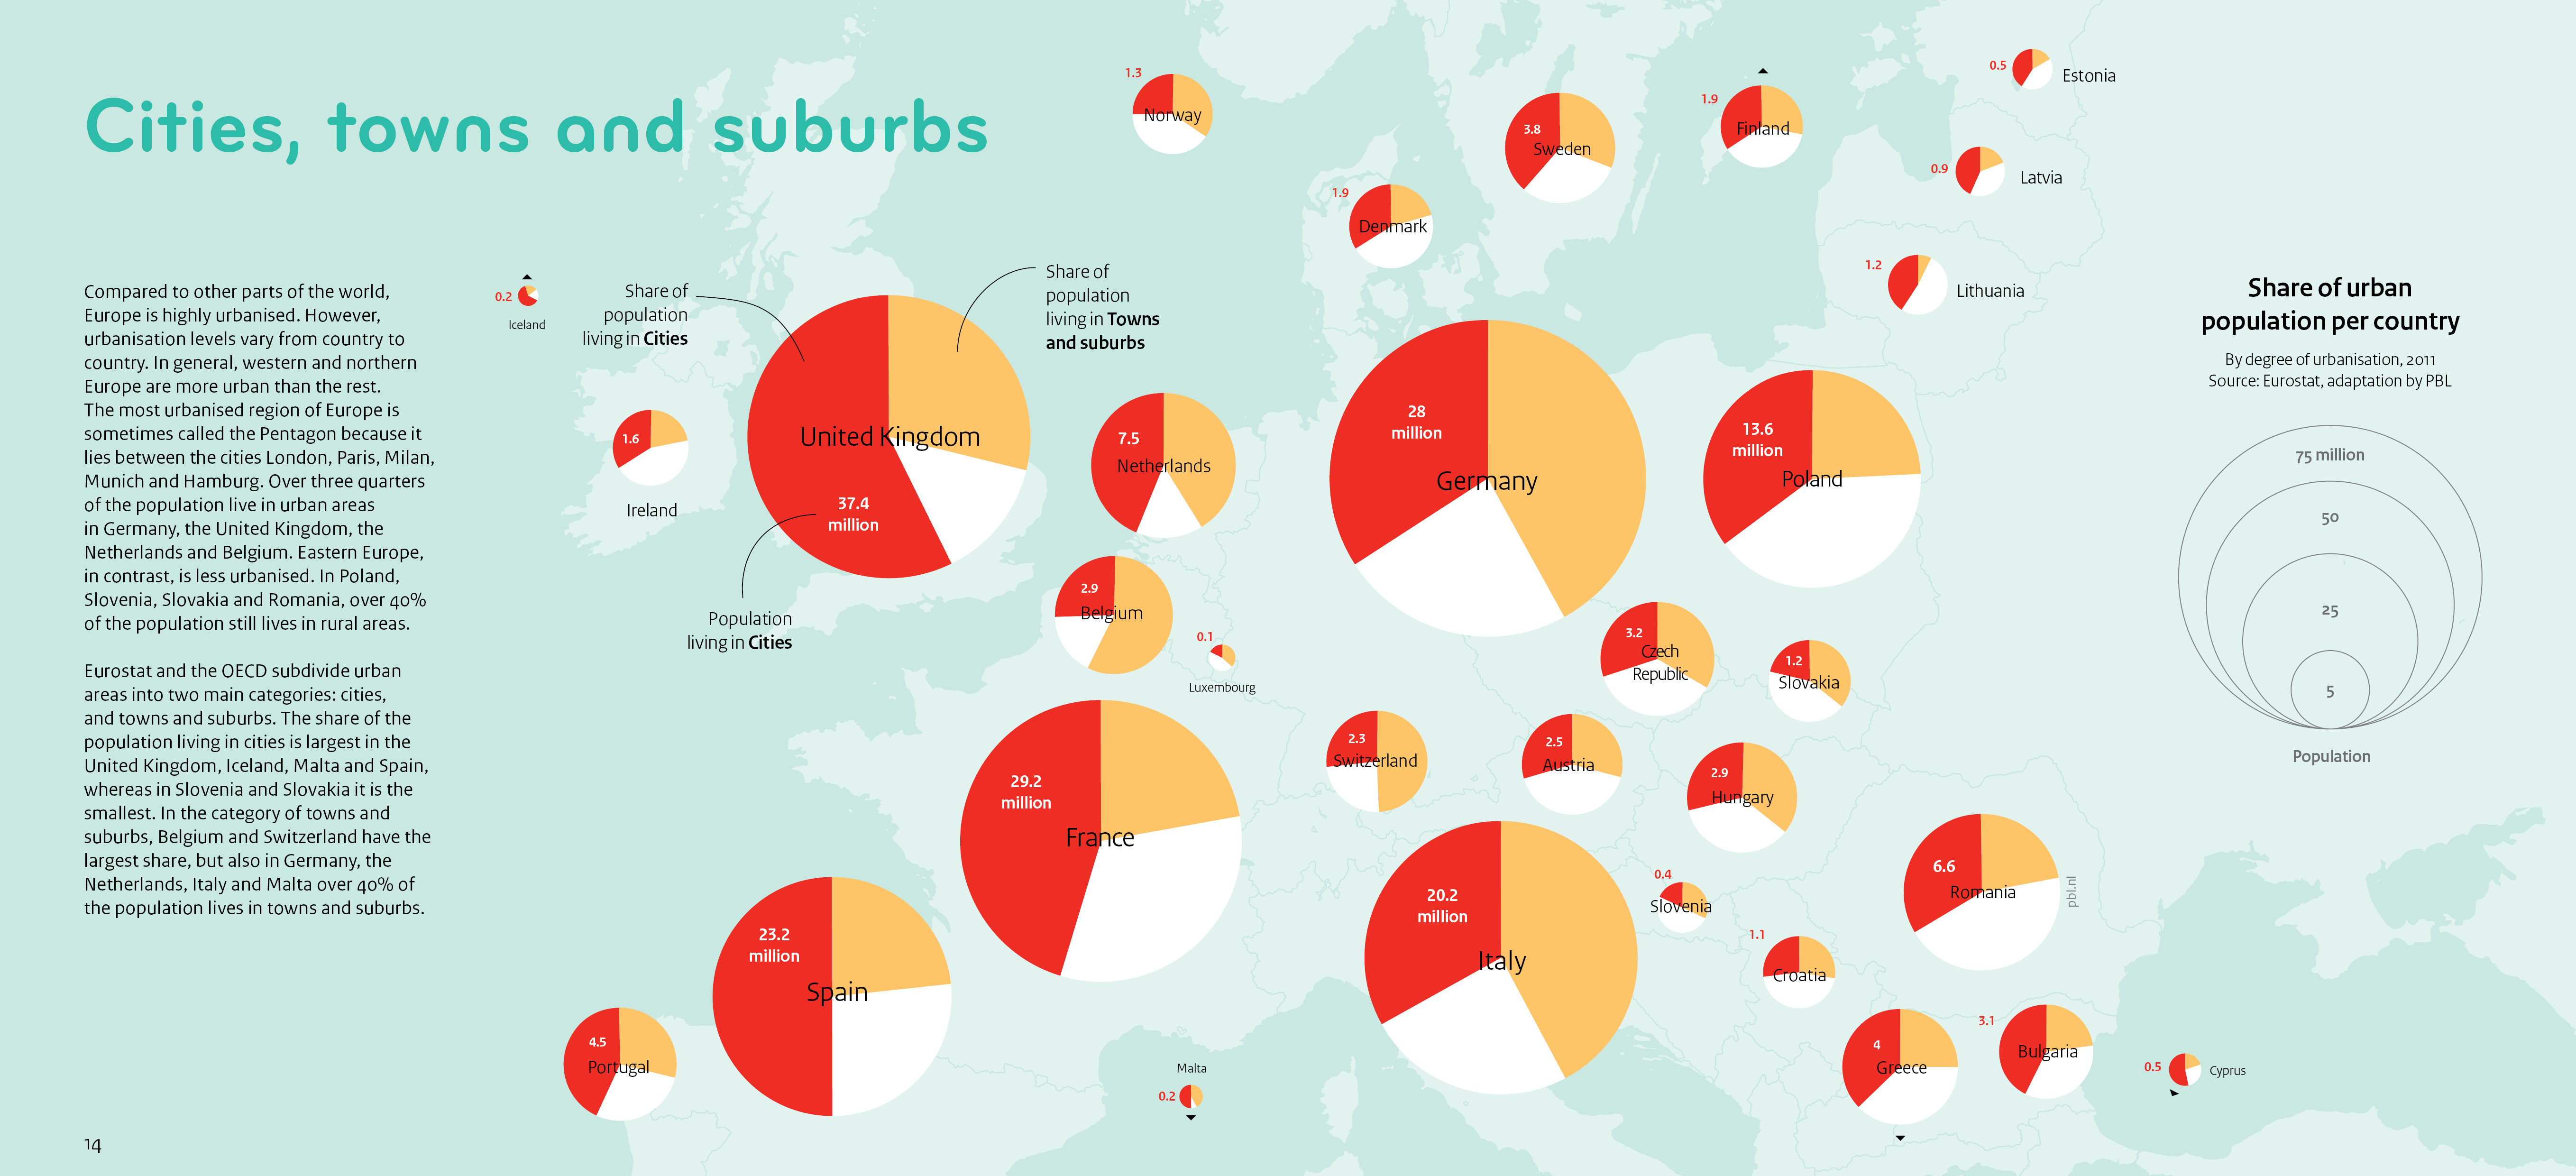 This infographic shows the share of population living in ‘cities’, ‘towns and suburbs’ and ‘rural areas’ per country.